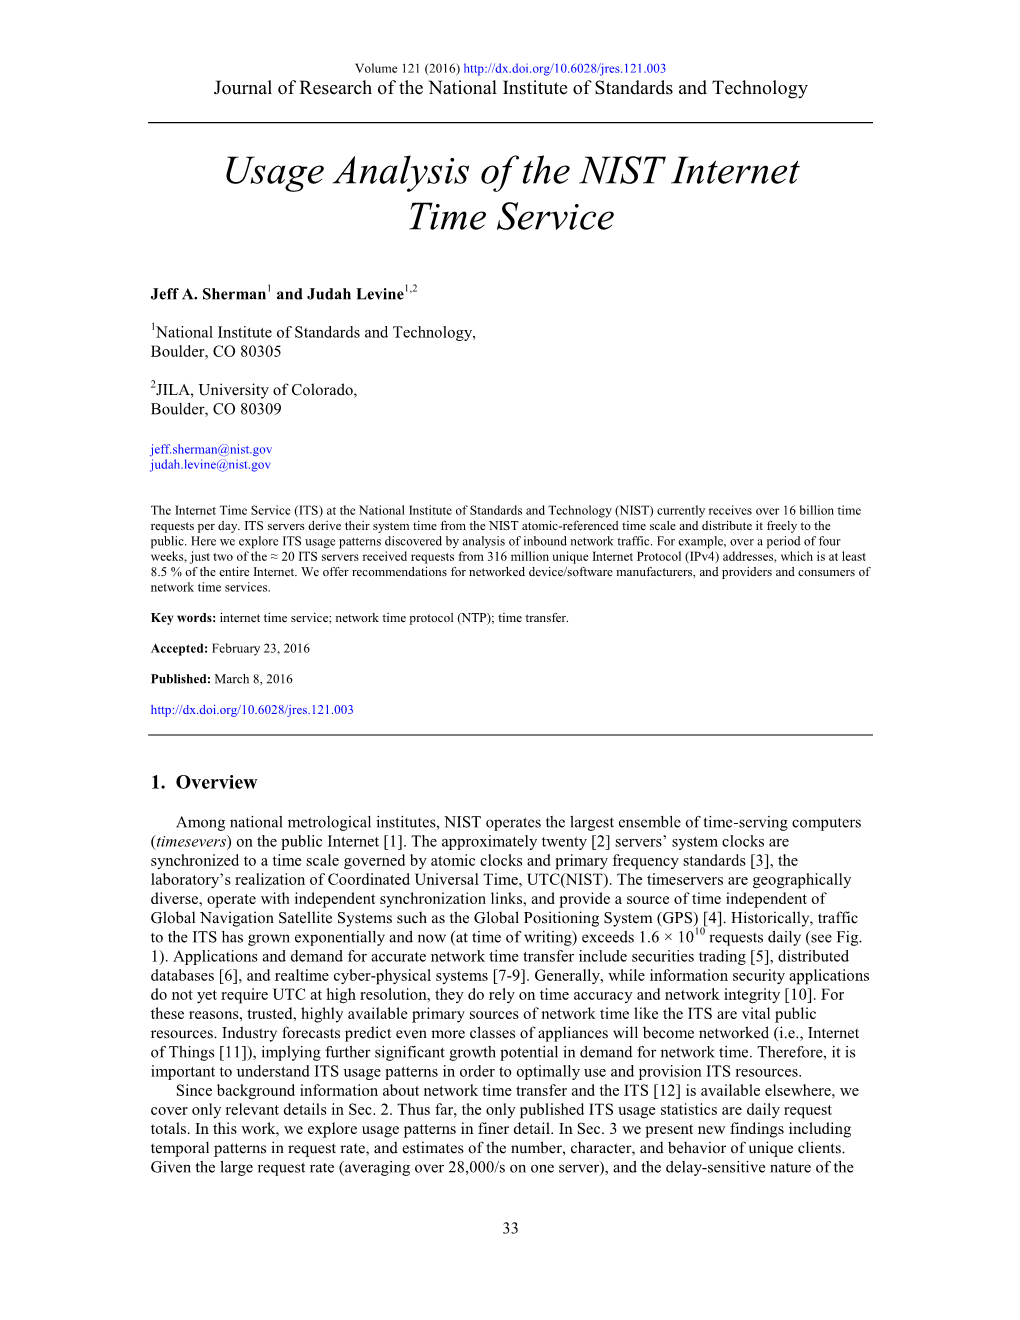 Usage Analysis of the NIST Internet Time Service